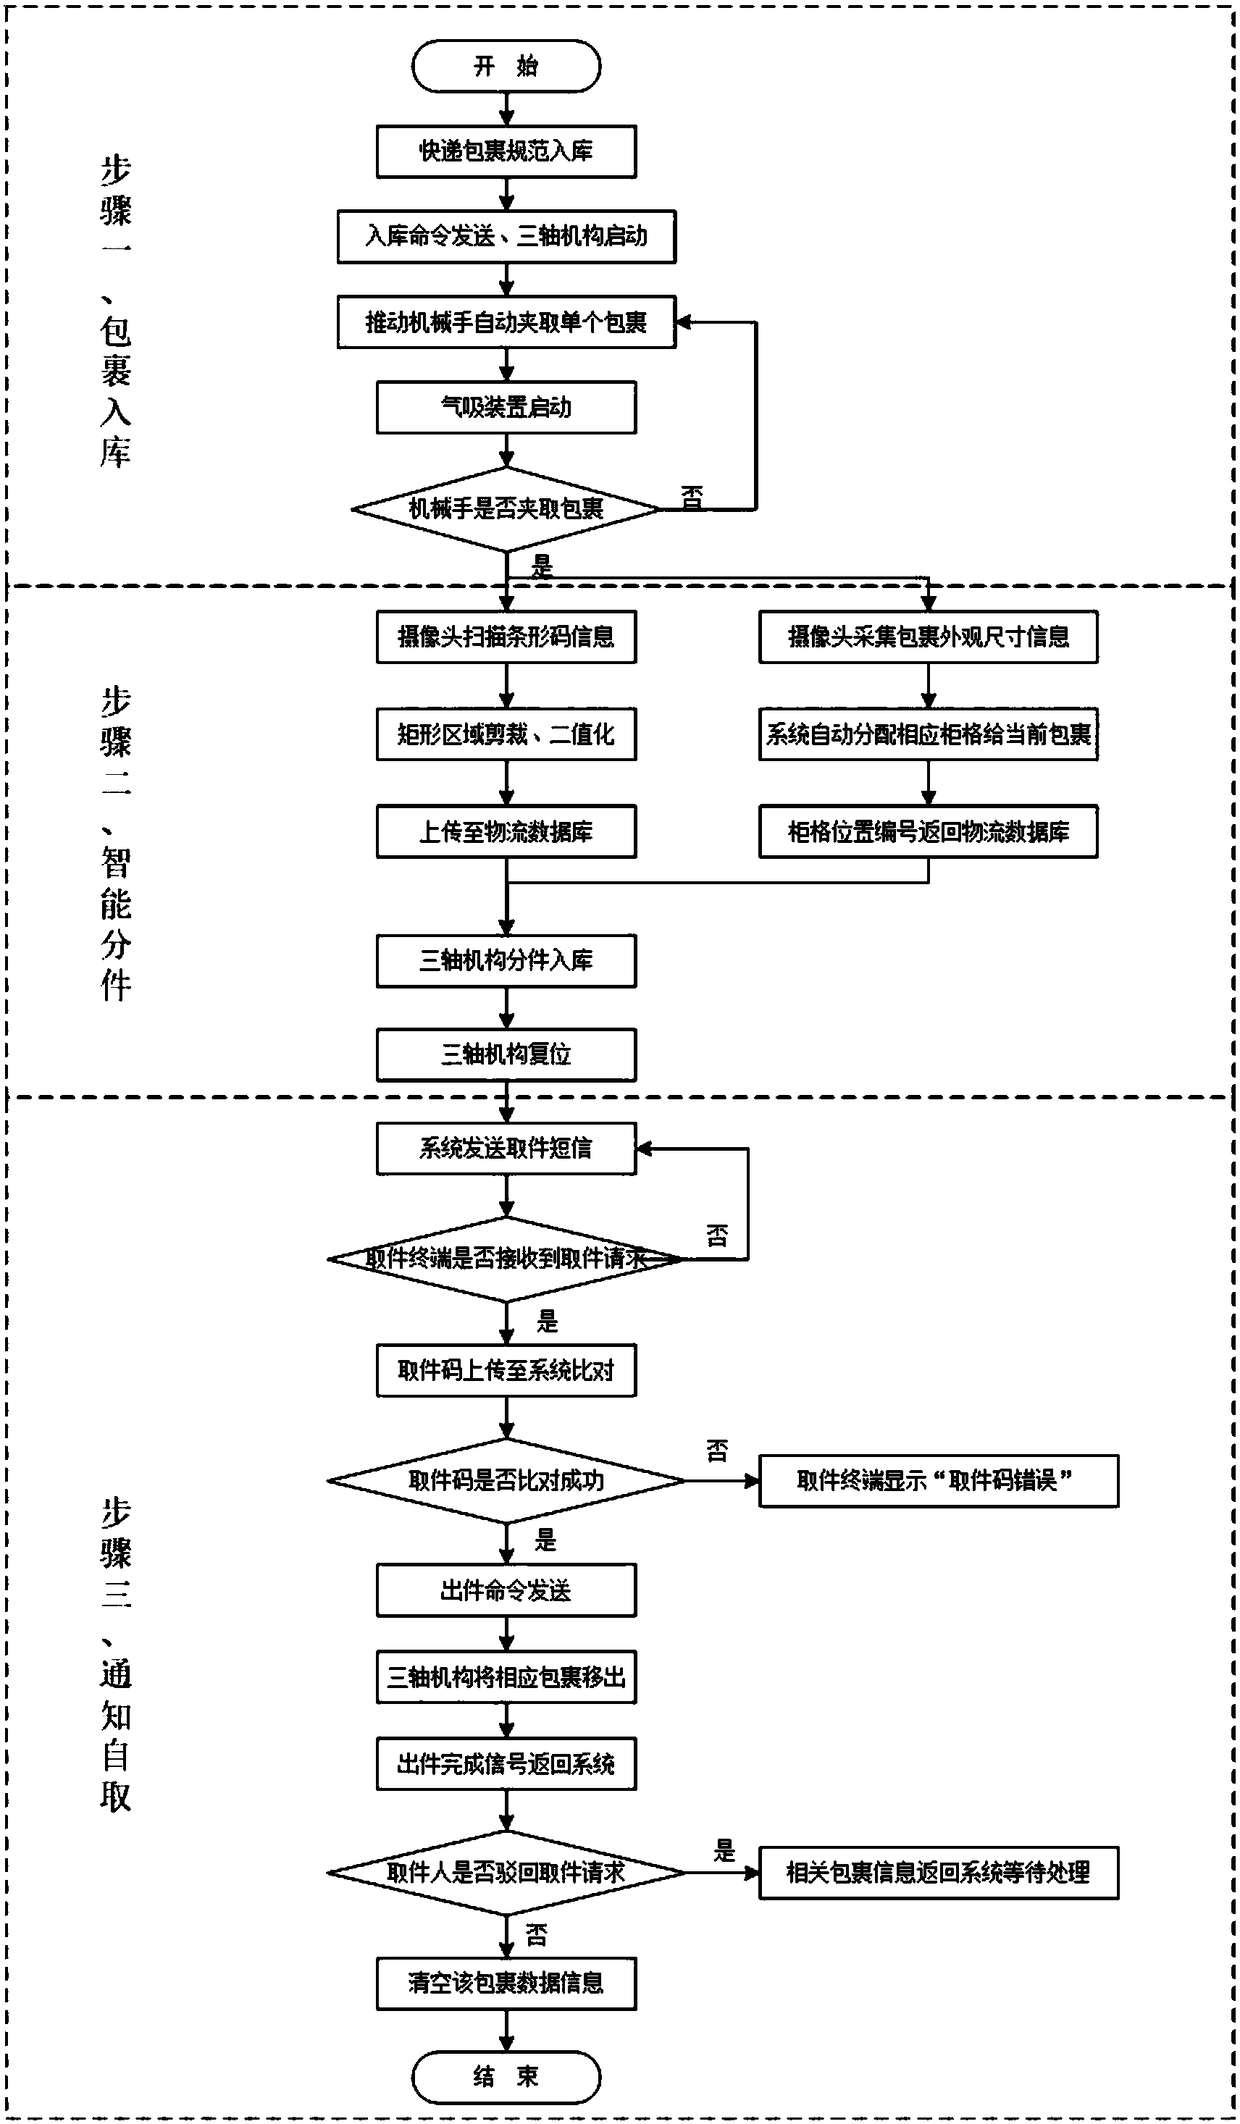 Express separation and self-fetching terminal system and method based on three-axis mobile platform